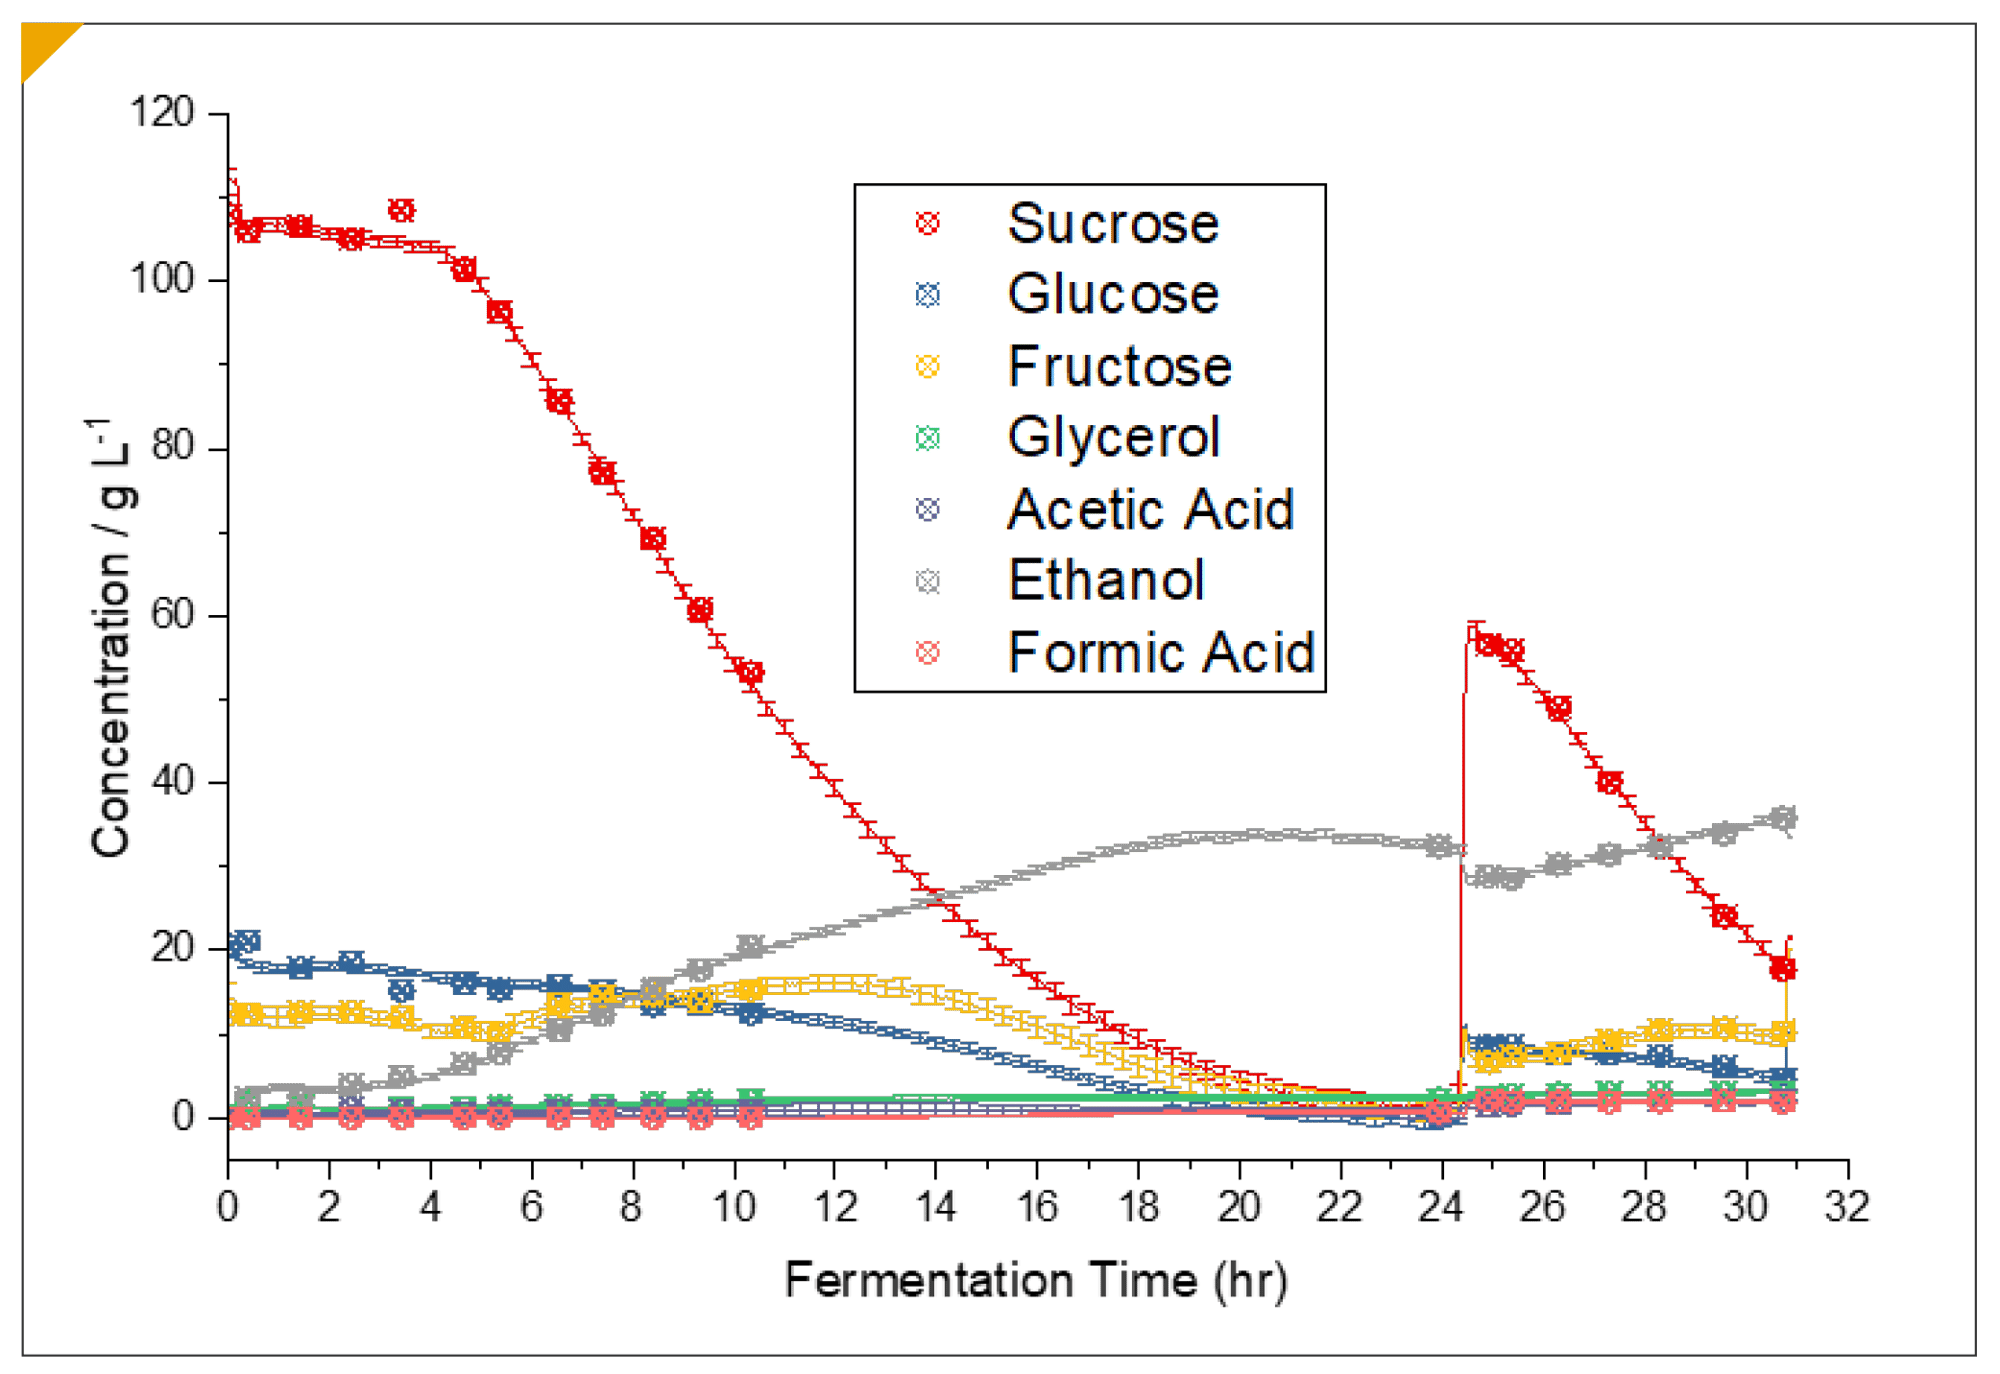 Plot of chemicals monitored by the IRmadillo during a fermentation process over 32 hrs clearly showing ability of the instrument to monitor multiple species simultaneously (sugars, acids, and alcohols).